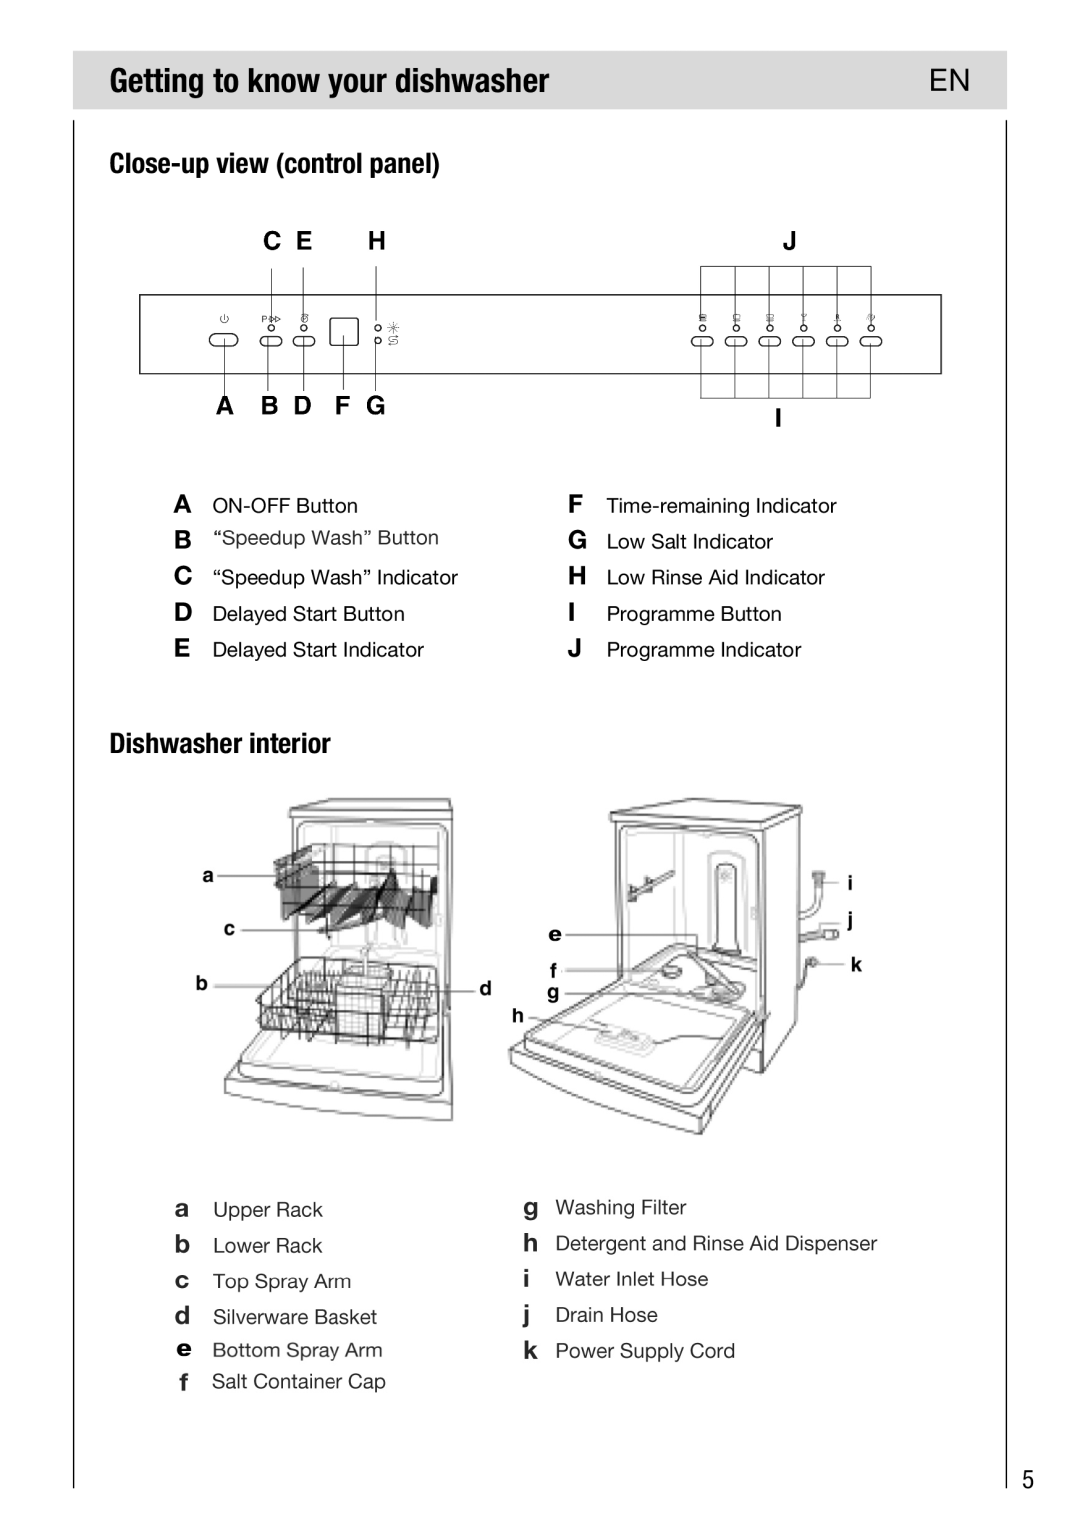 Haier DW12-PFE2-E manual Getting to know your dishwasher, Close-up view control panel, Dishwasher interior 